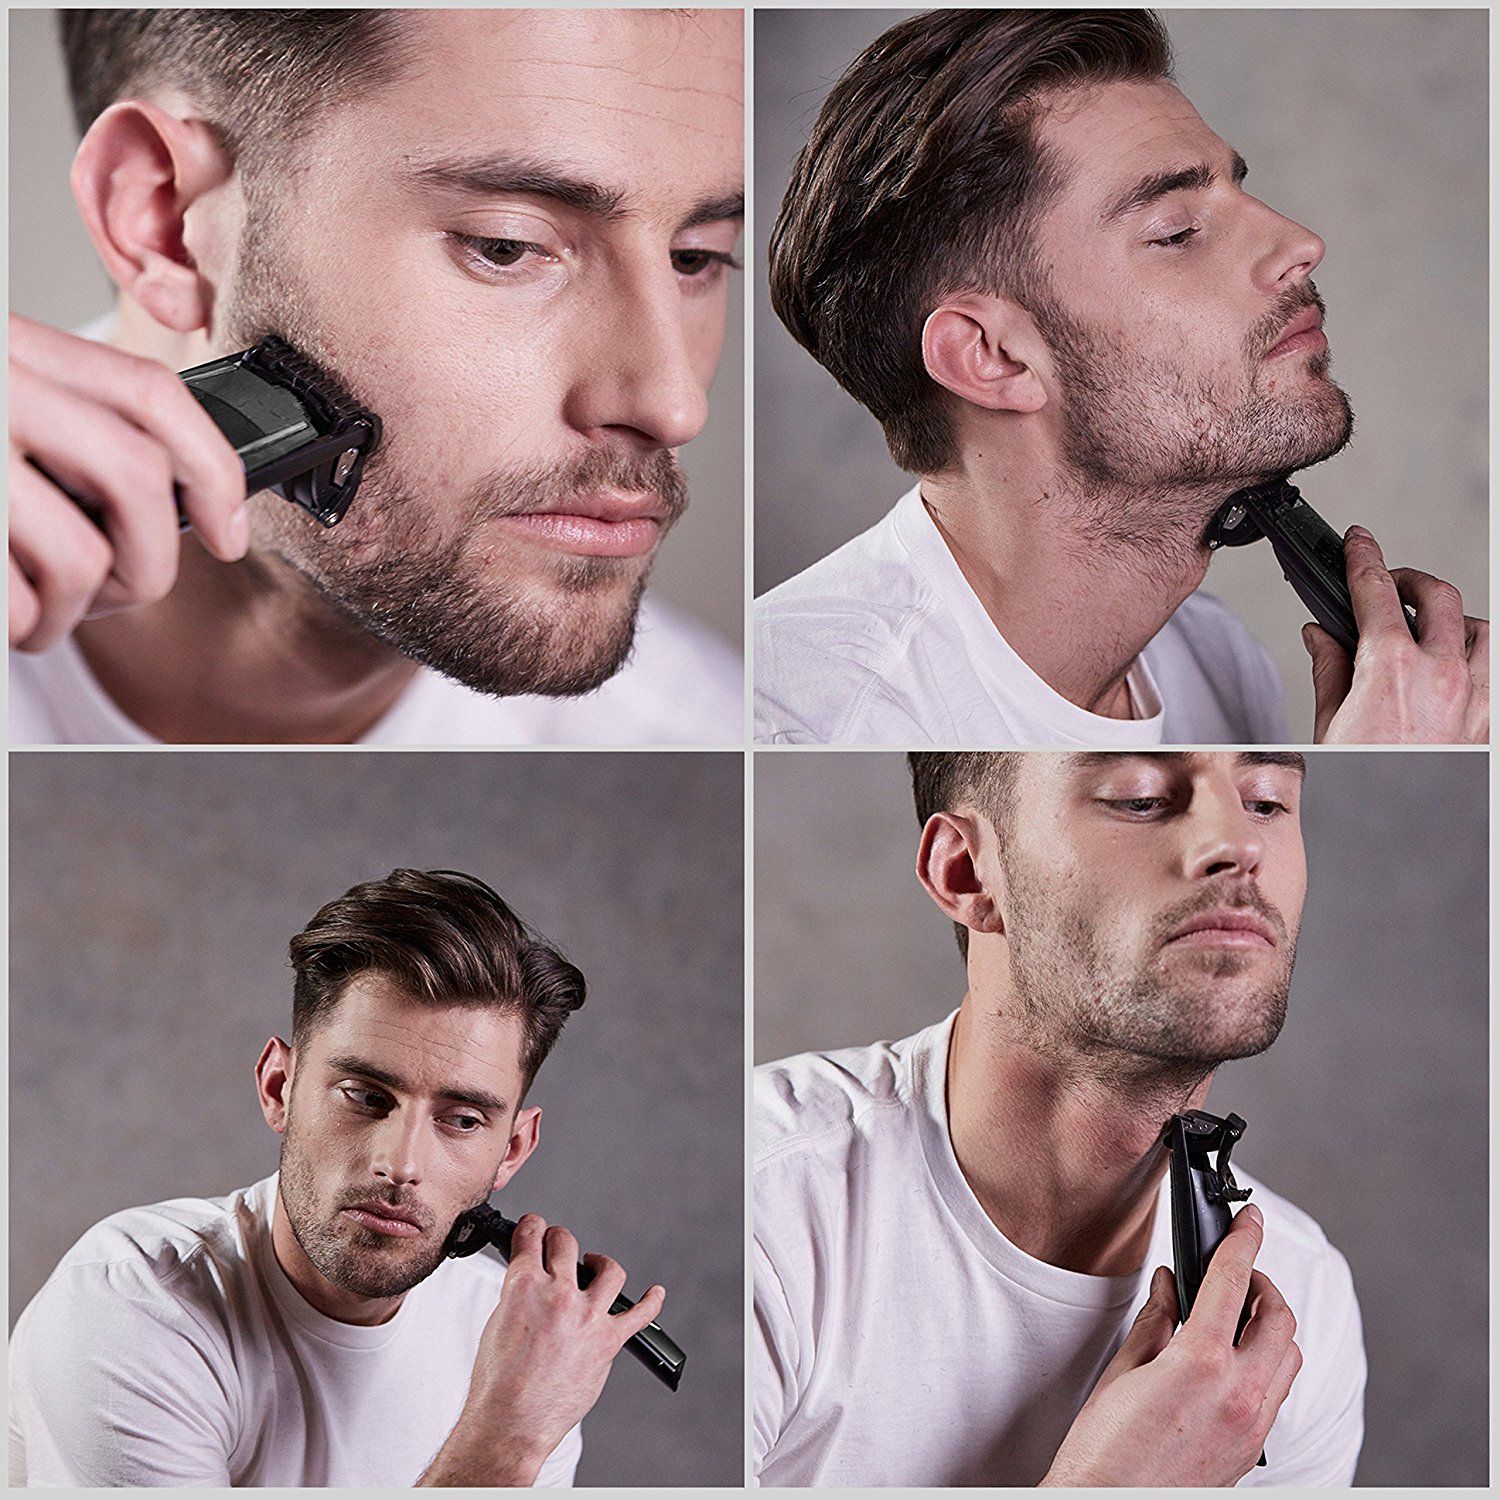 BaByliss for Men 7898U Super Stubble and Beard Trimmer UK Review